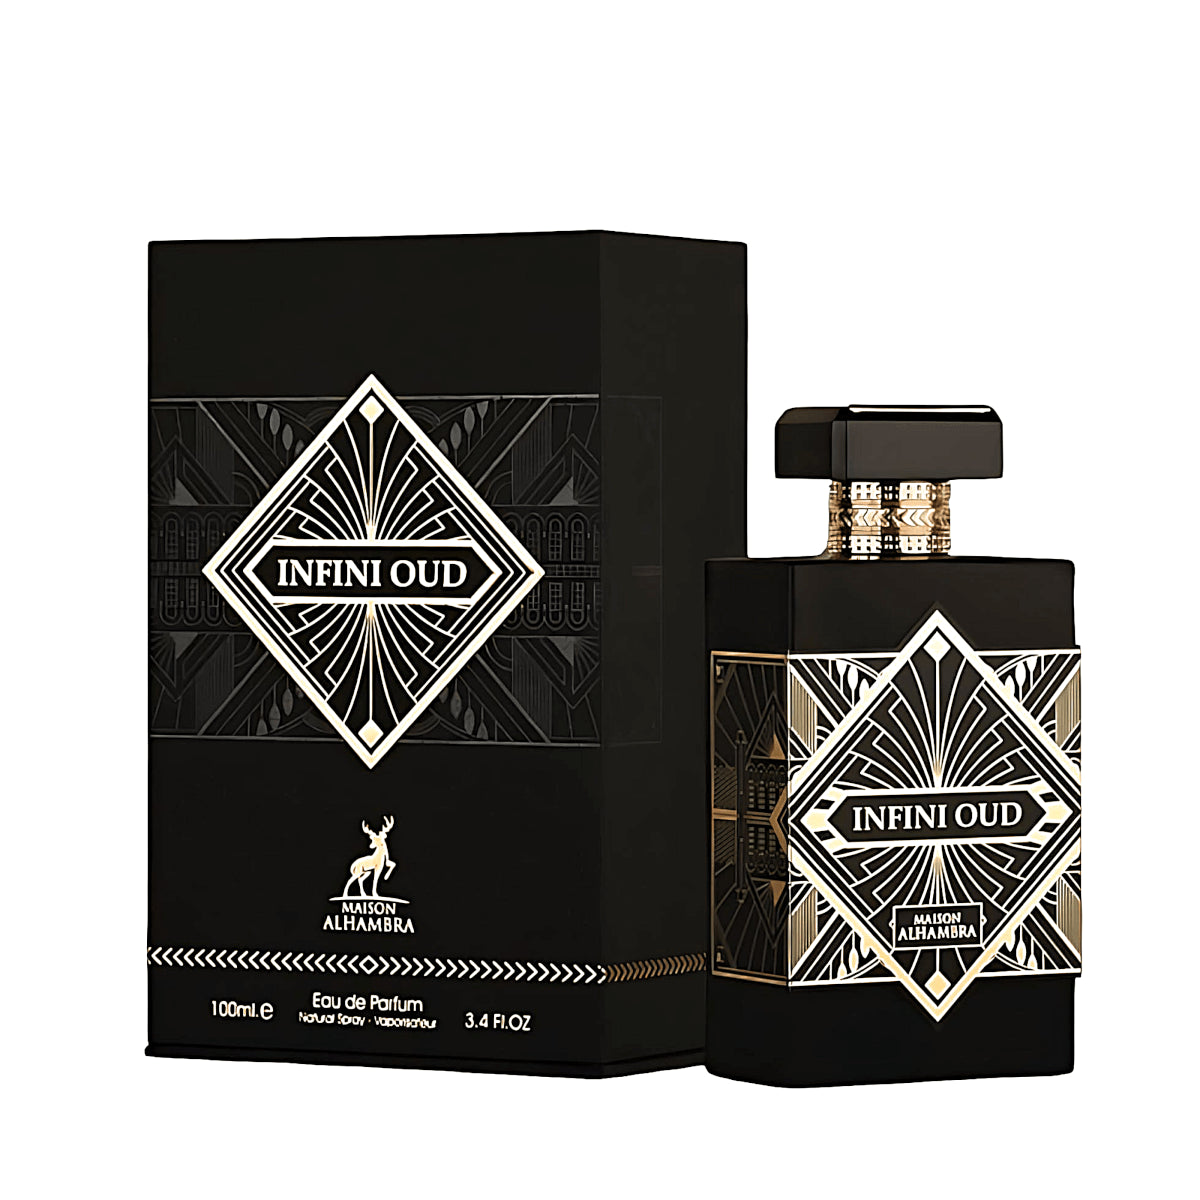 Infini Oud - Maison Alhambra - 100 ML - Eau de Parfum -  Inspired by Initioz Oud for Greatness